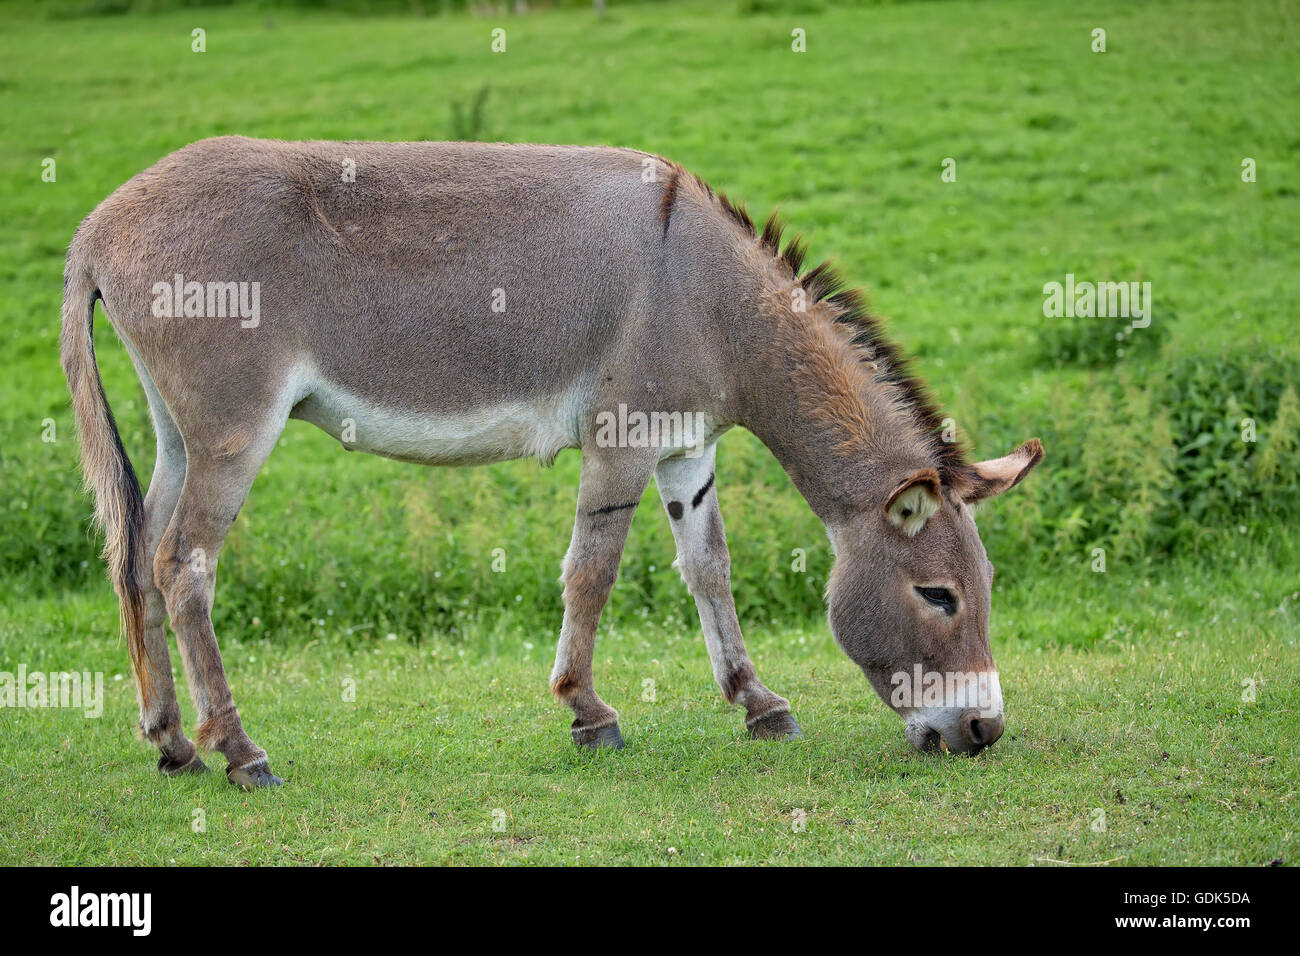 Donkey in a clearing in the wild Stock Photo